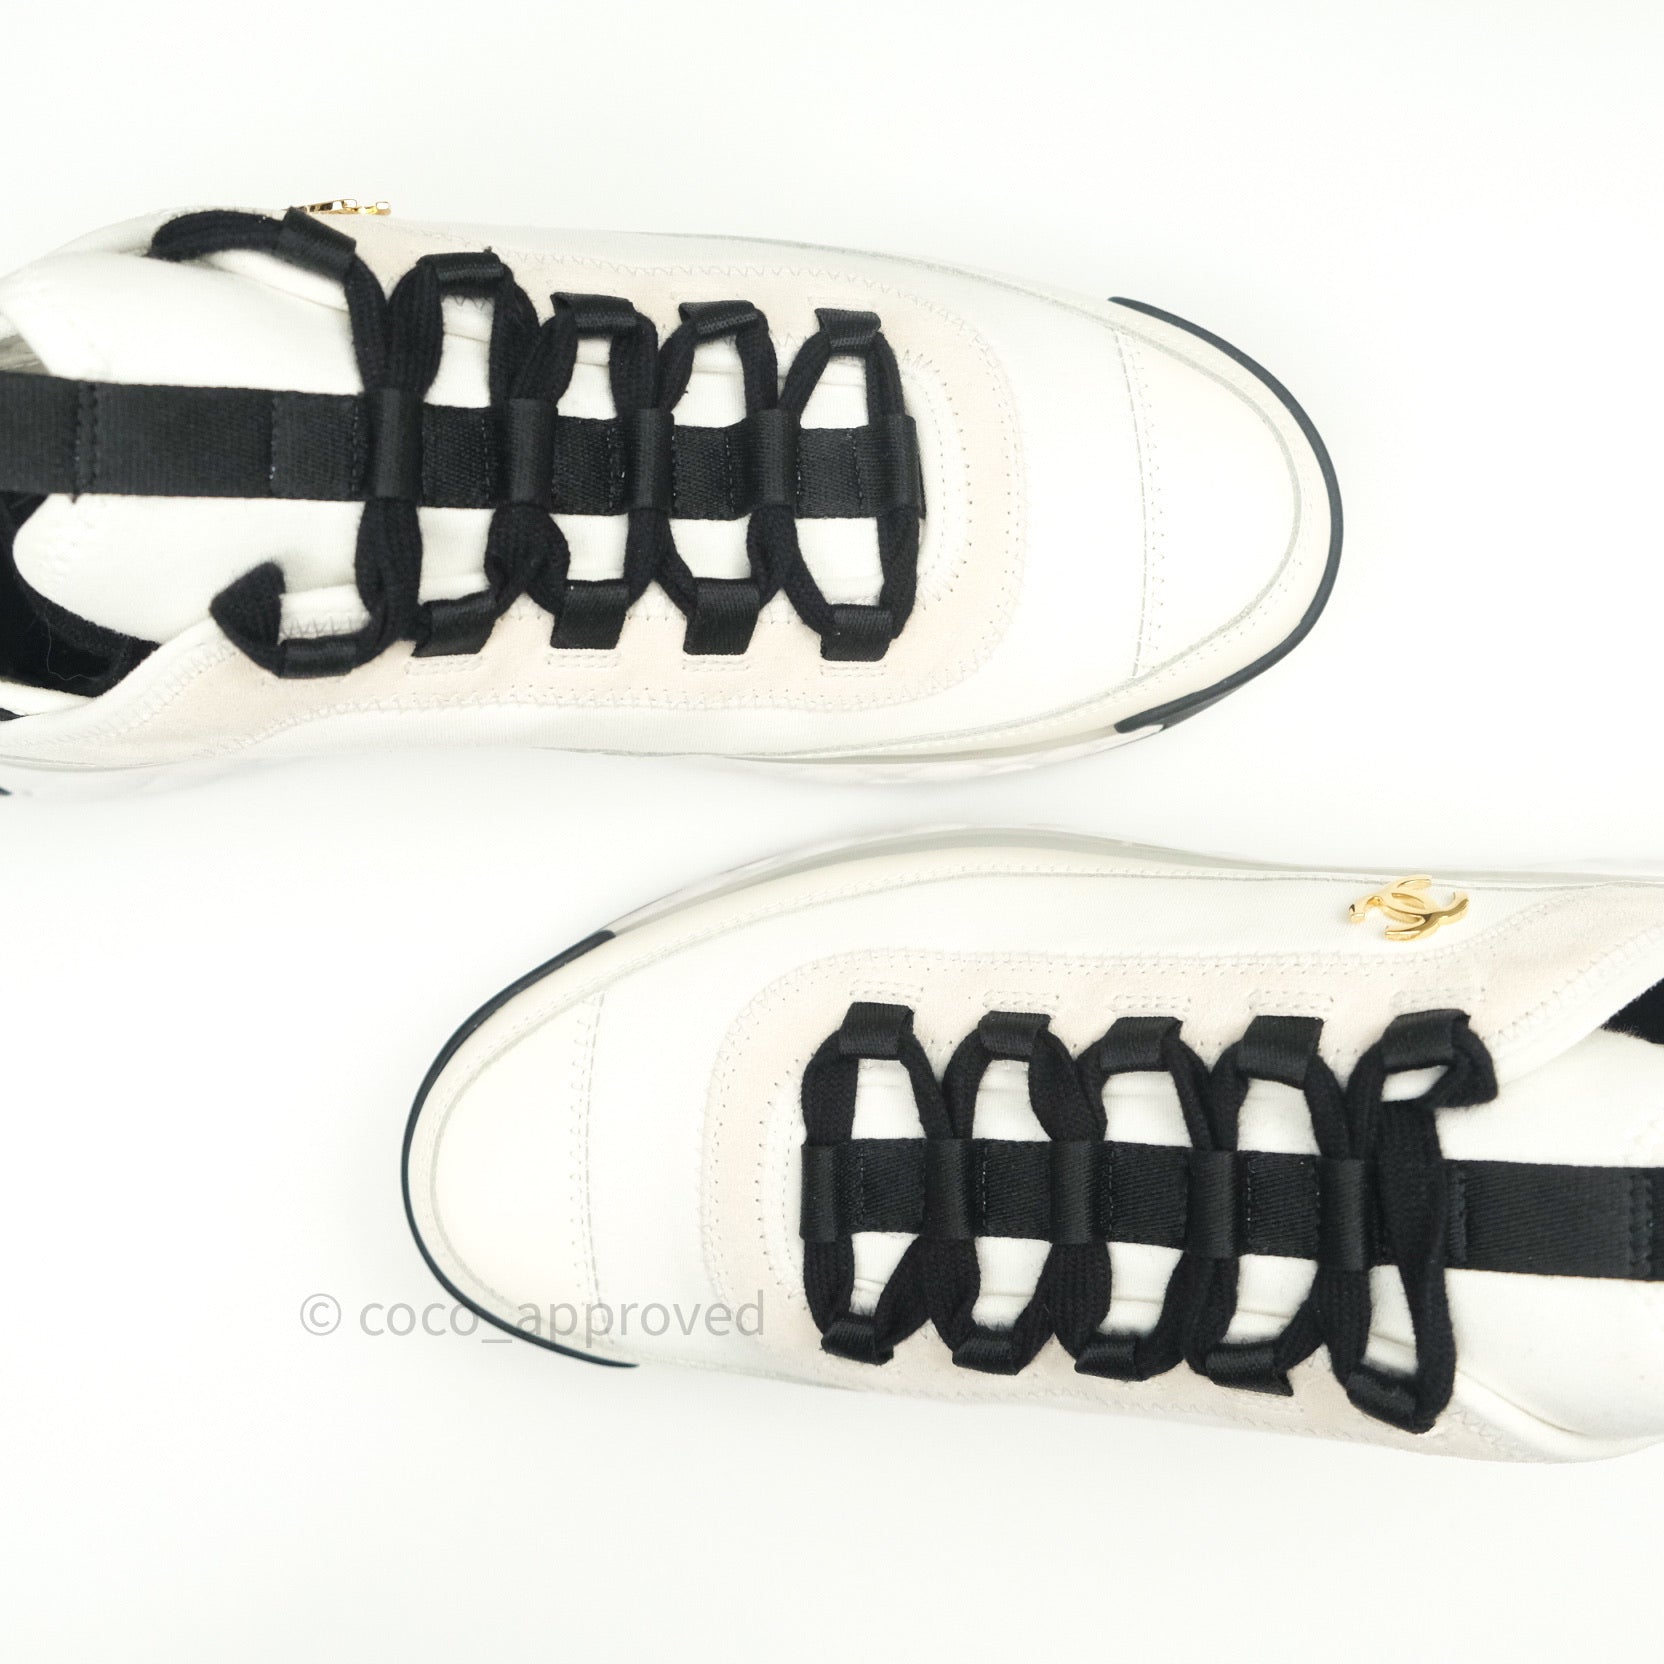 Chanel Sneakers Ivory White CC Size 38.5